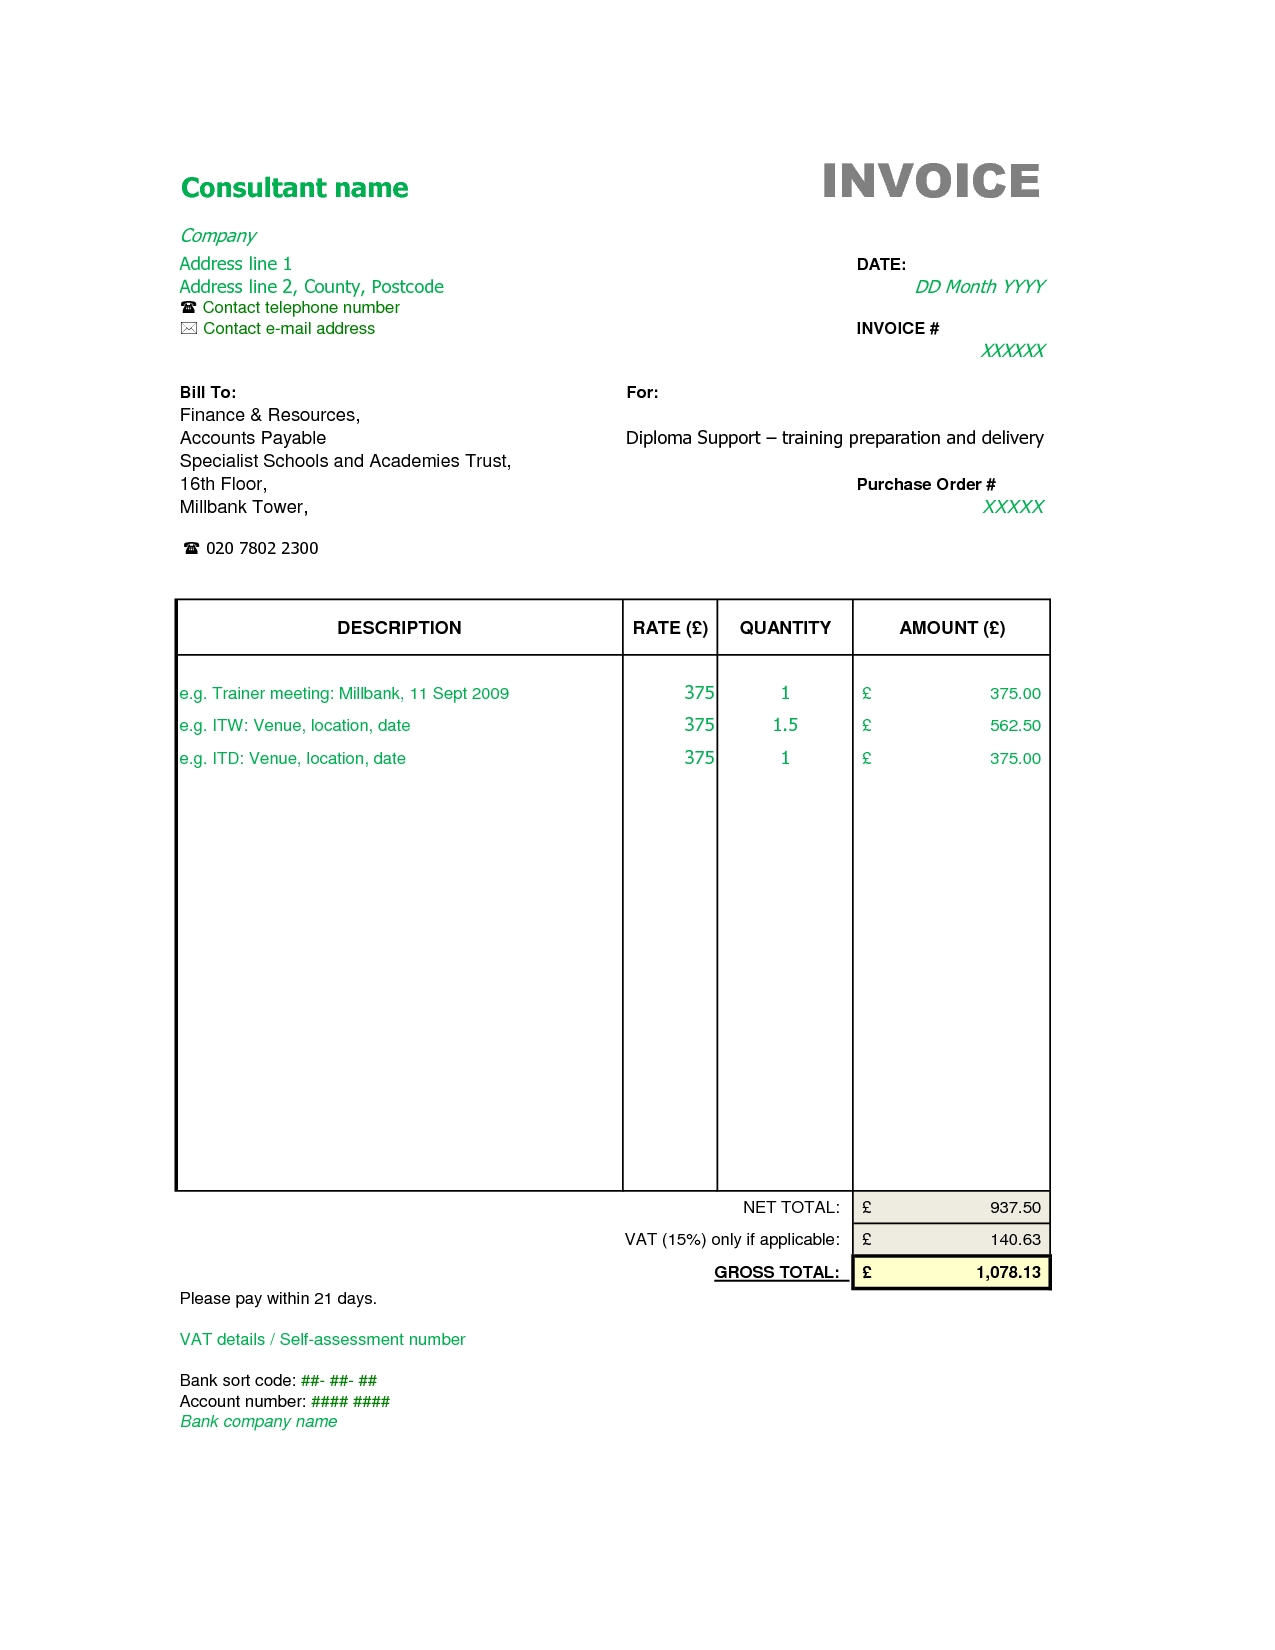 invoice template for consulting services consulting services invoice for consulting services